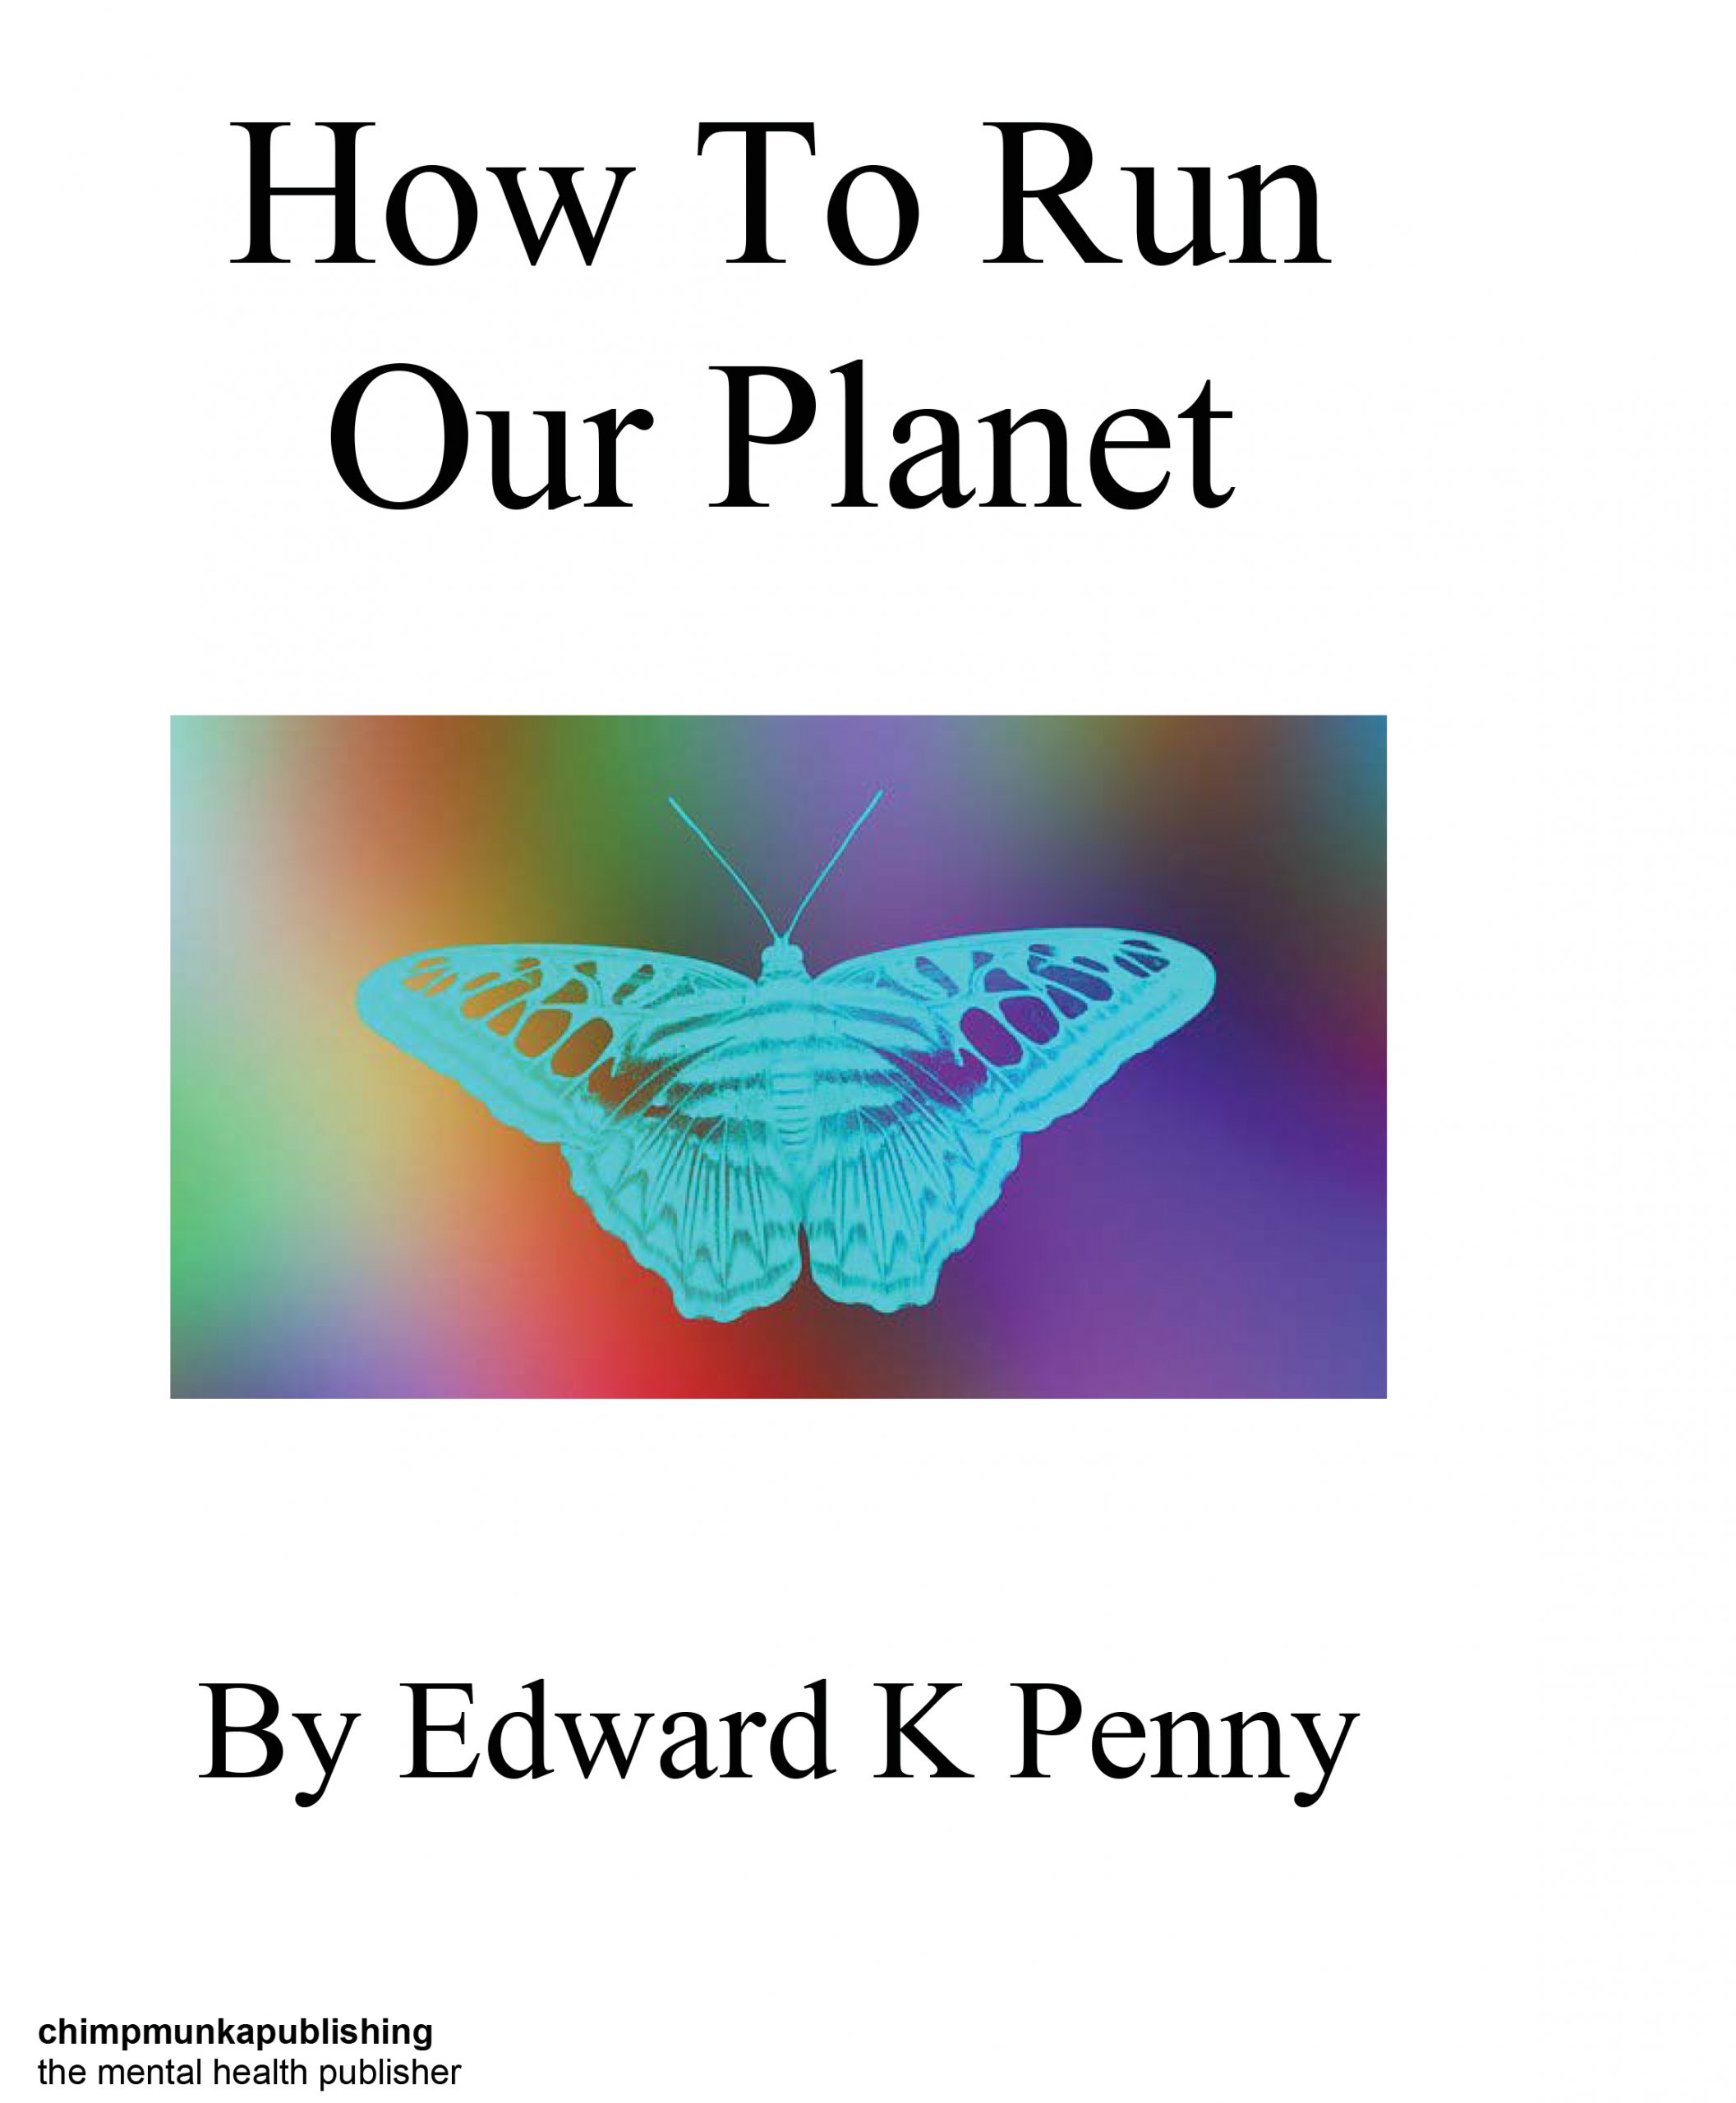 How to run Our Planet